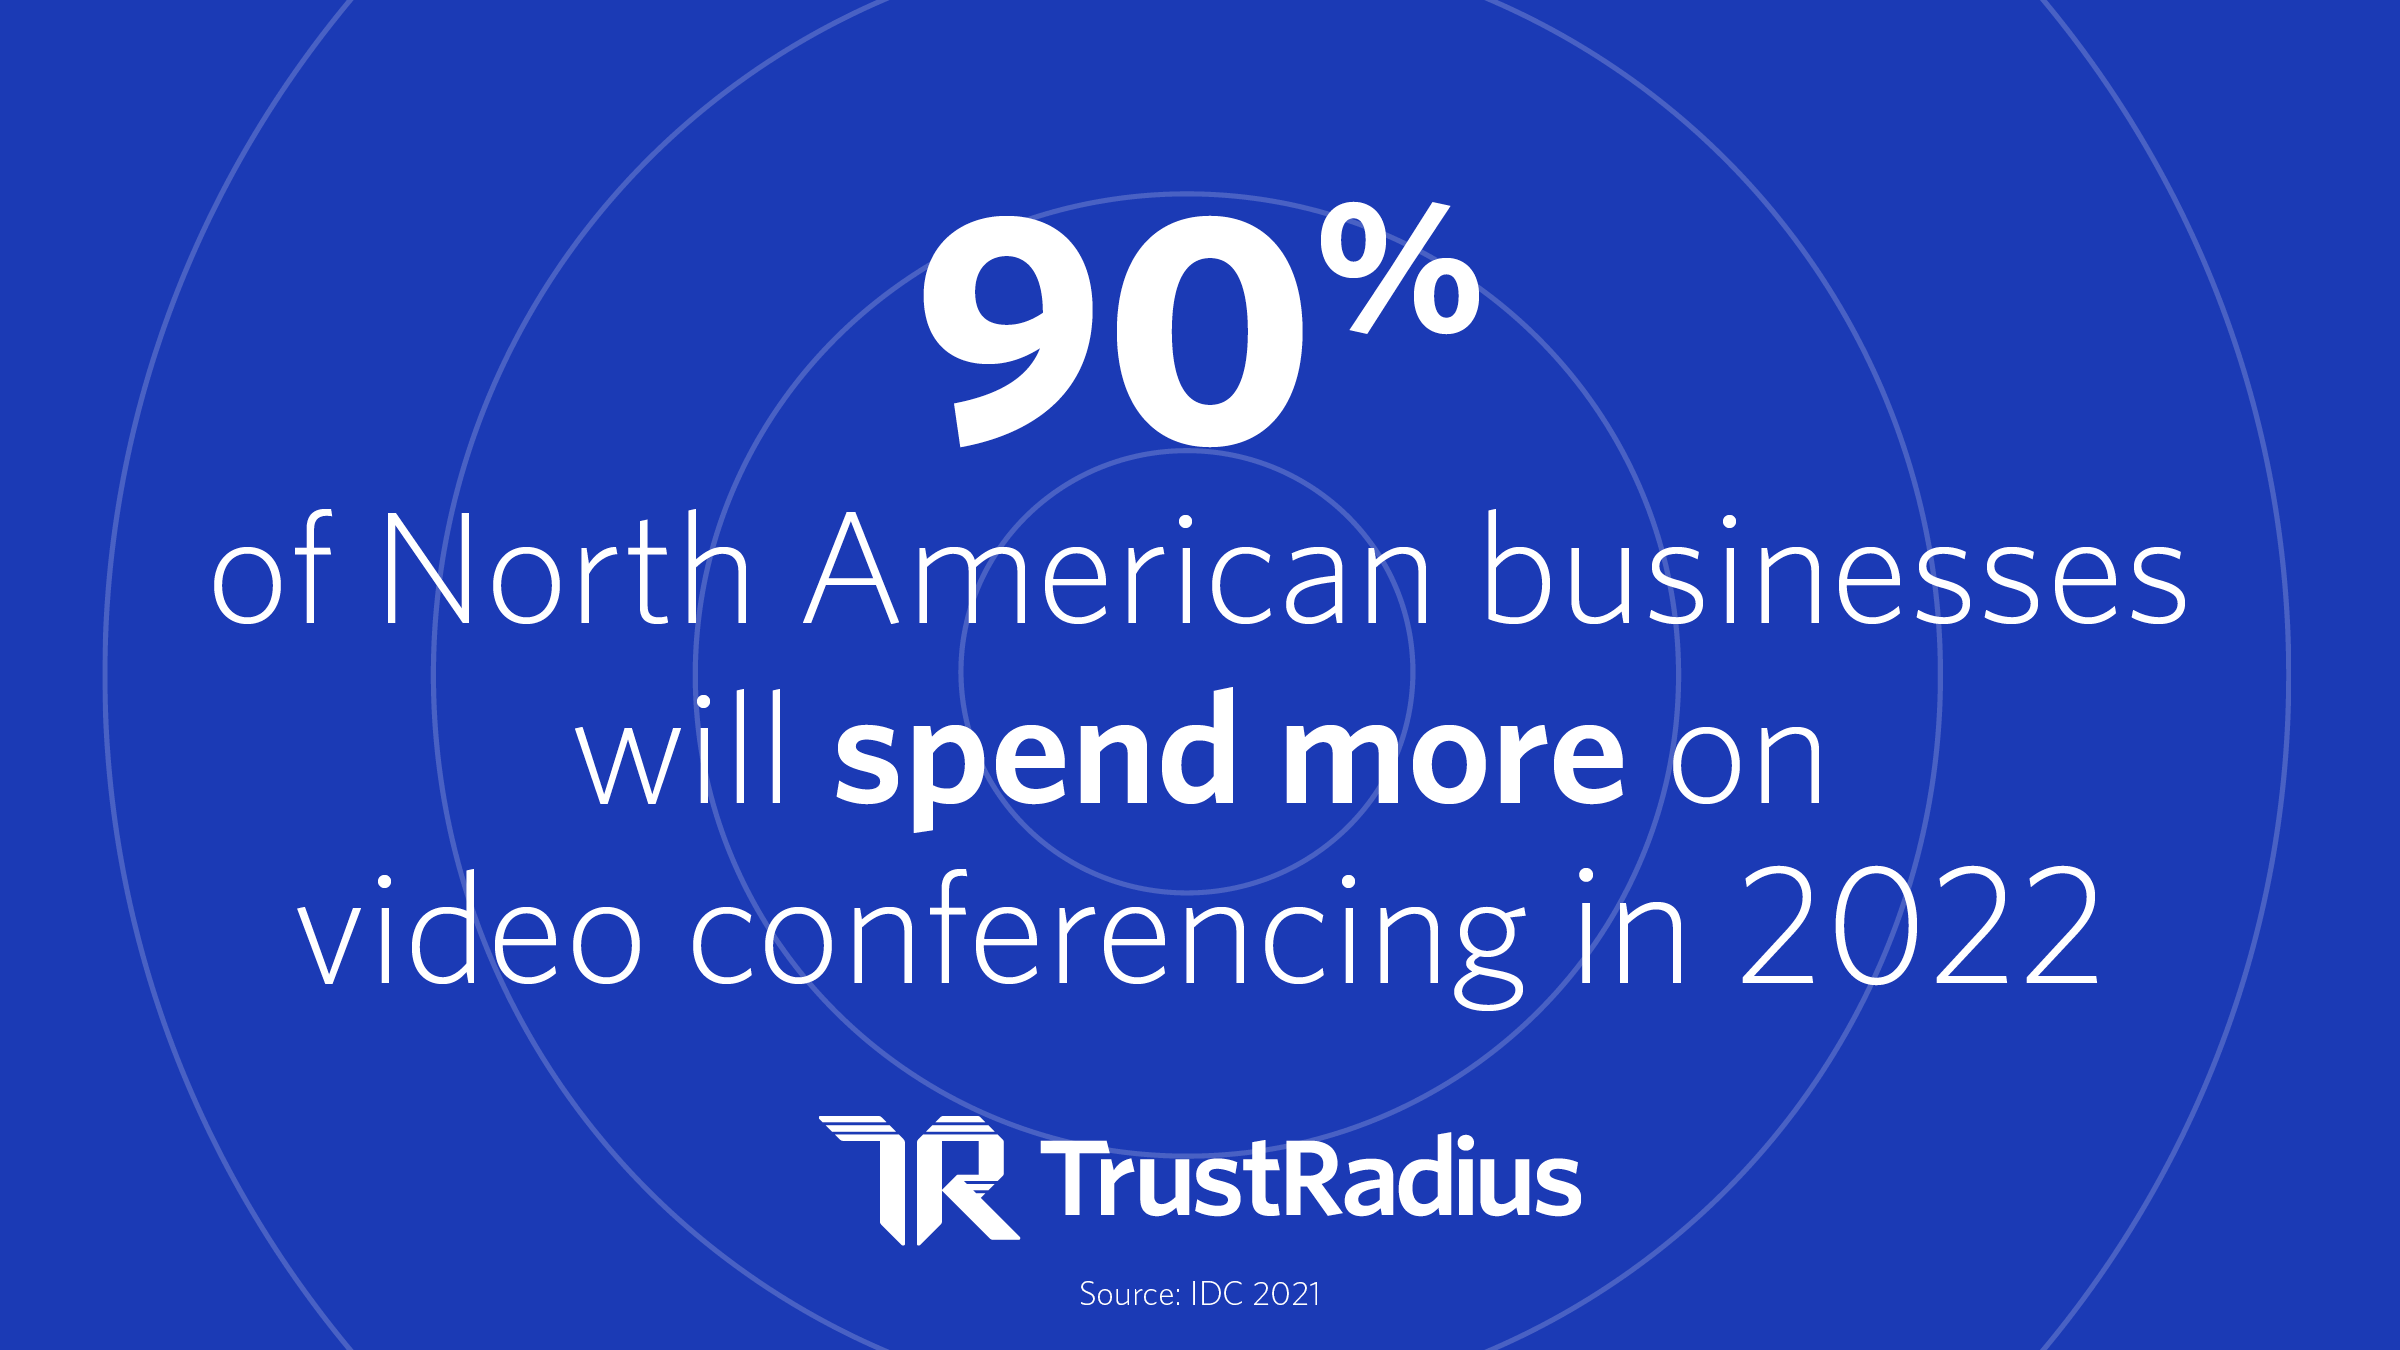 90% of North American Businesses will spend more on video conferencing in 2022